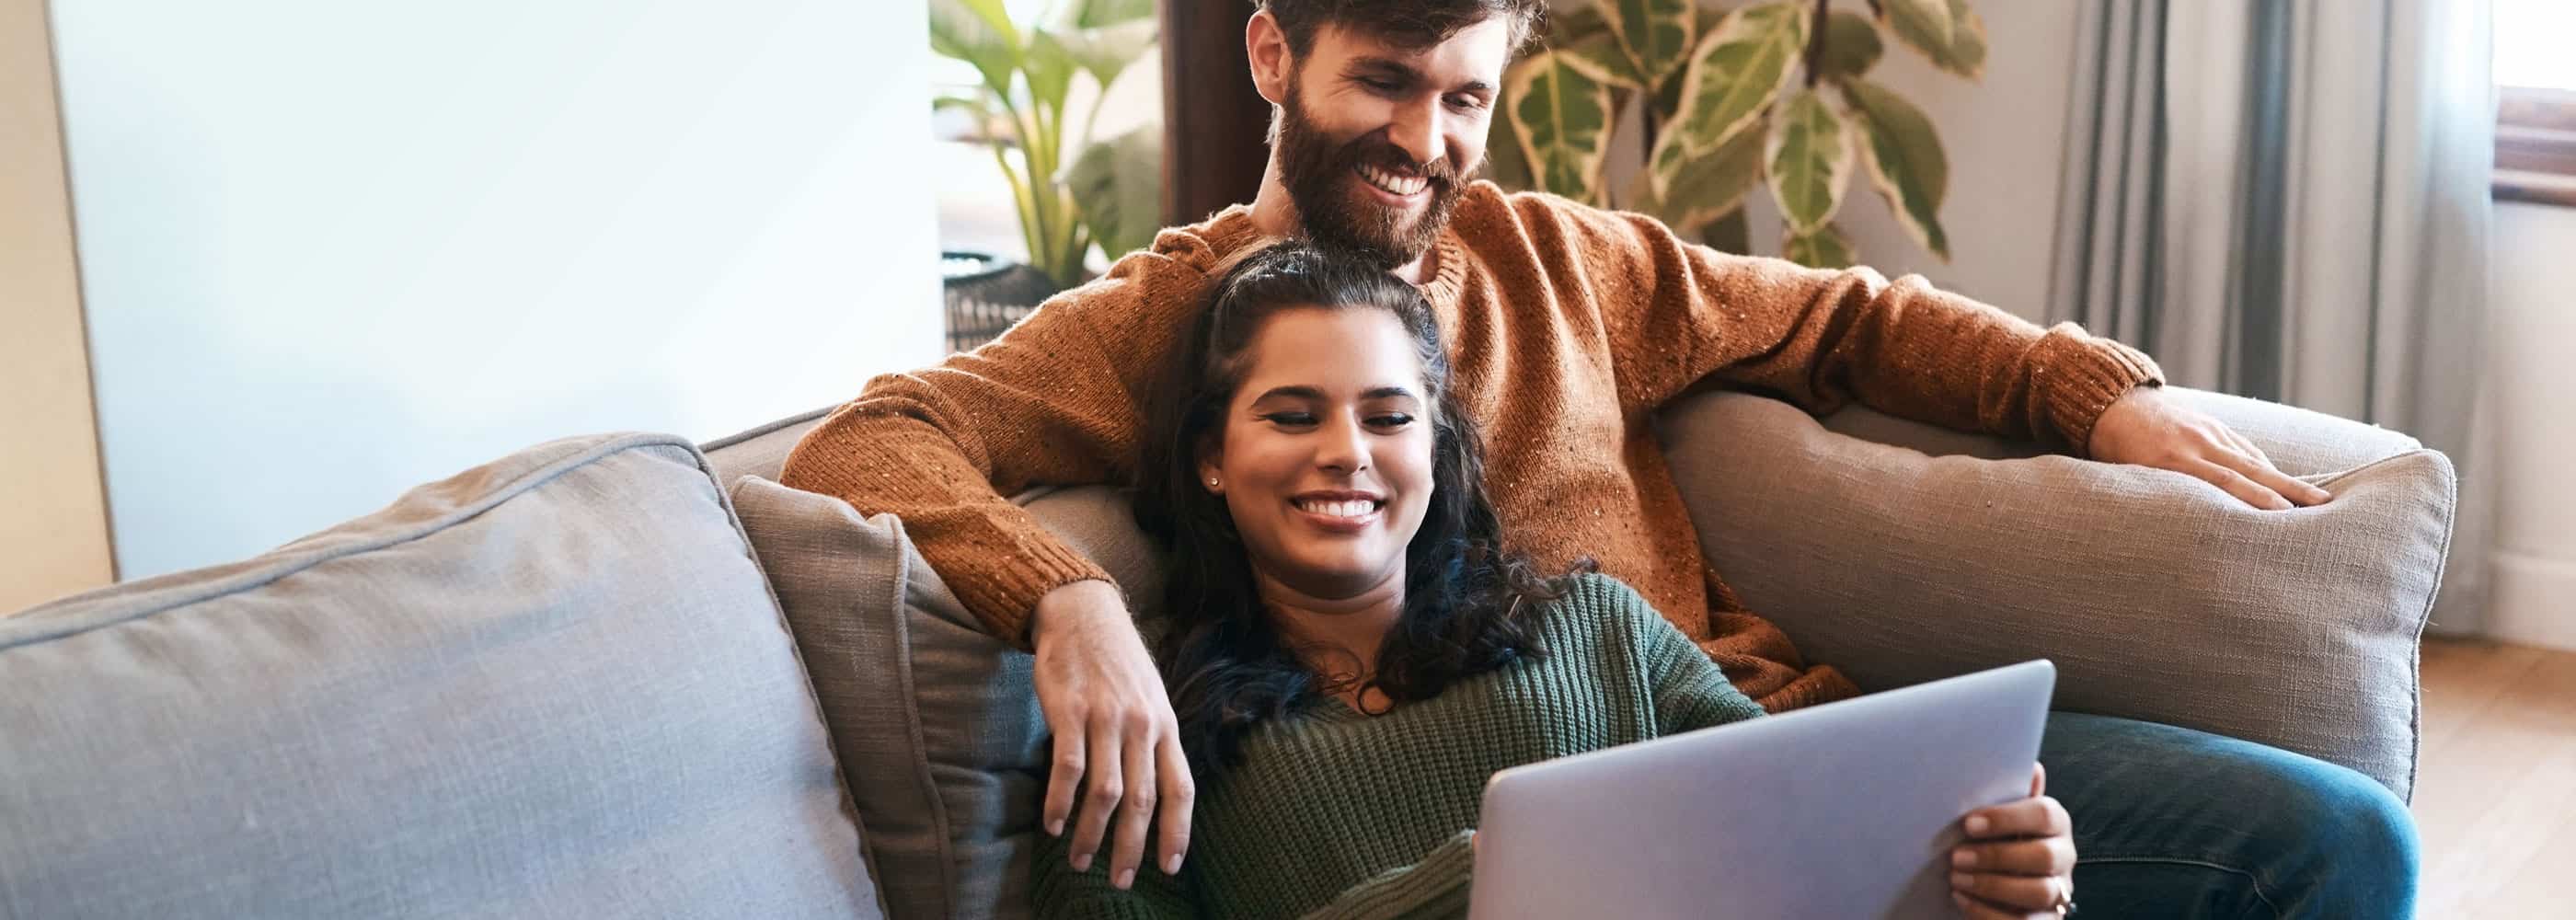 A couple smile while looking at a computer on a couch